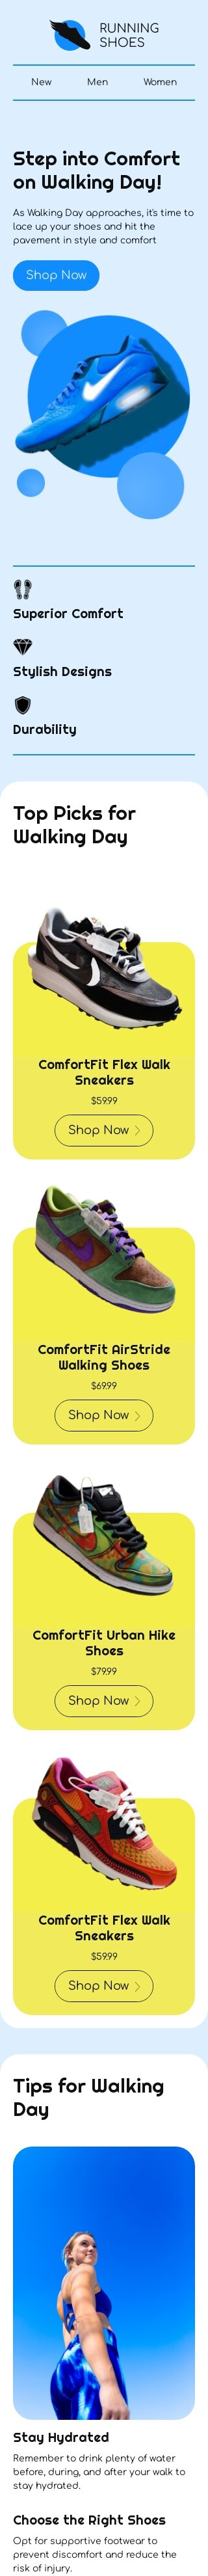 Walking Day email template "Step into Comfort" for fashion industry mobile view